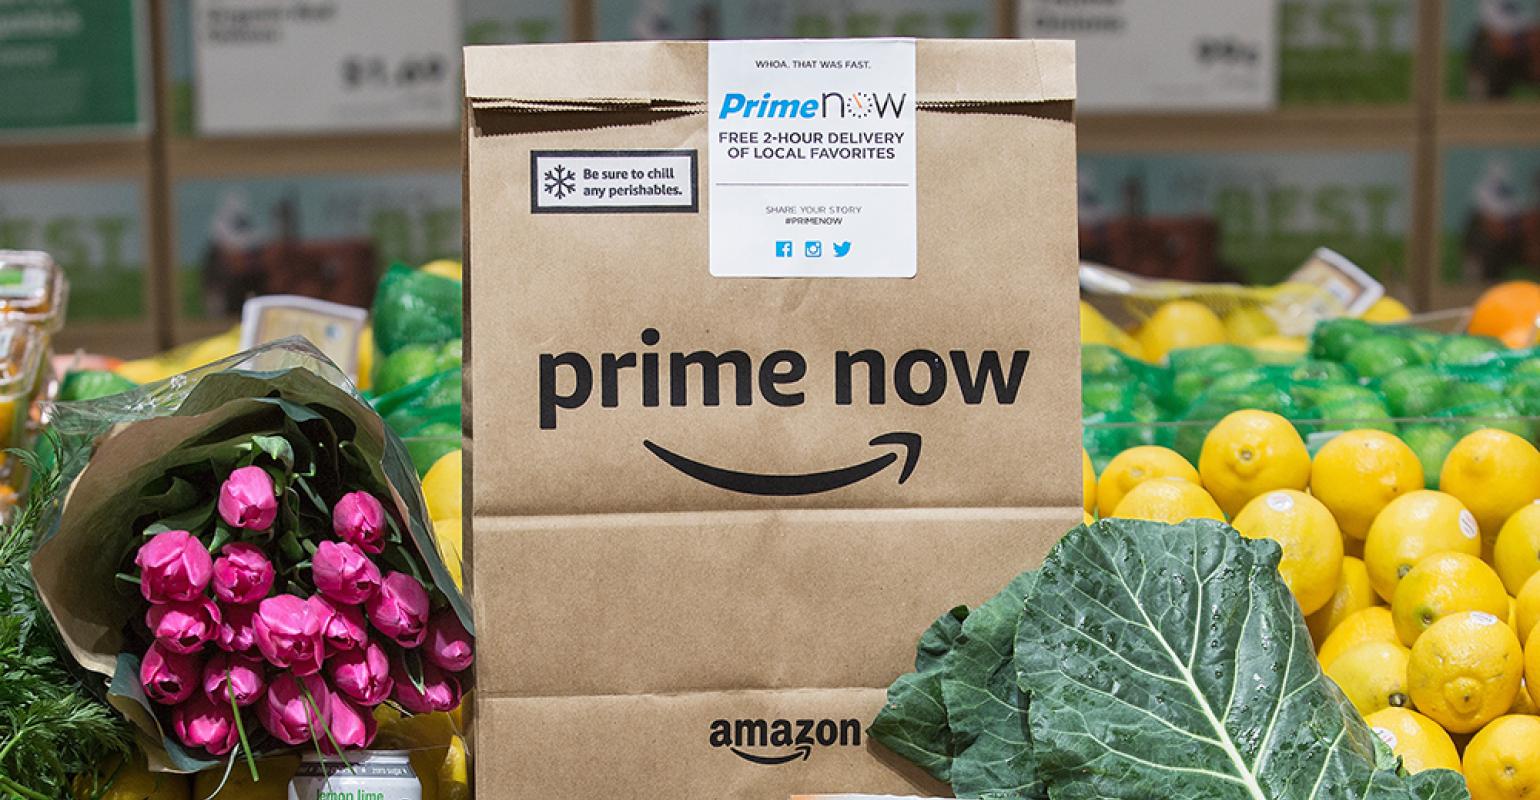 We ordered from Whole Foods using prime now and here's what happened